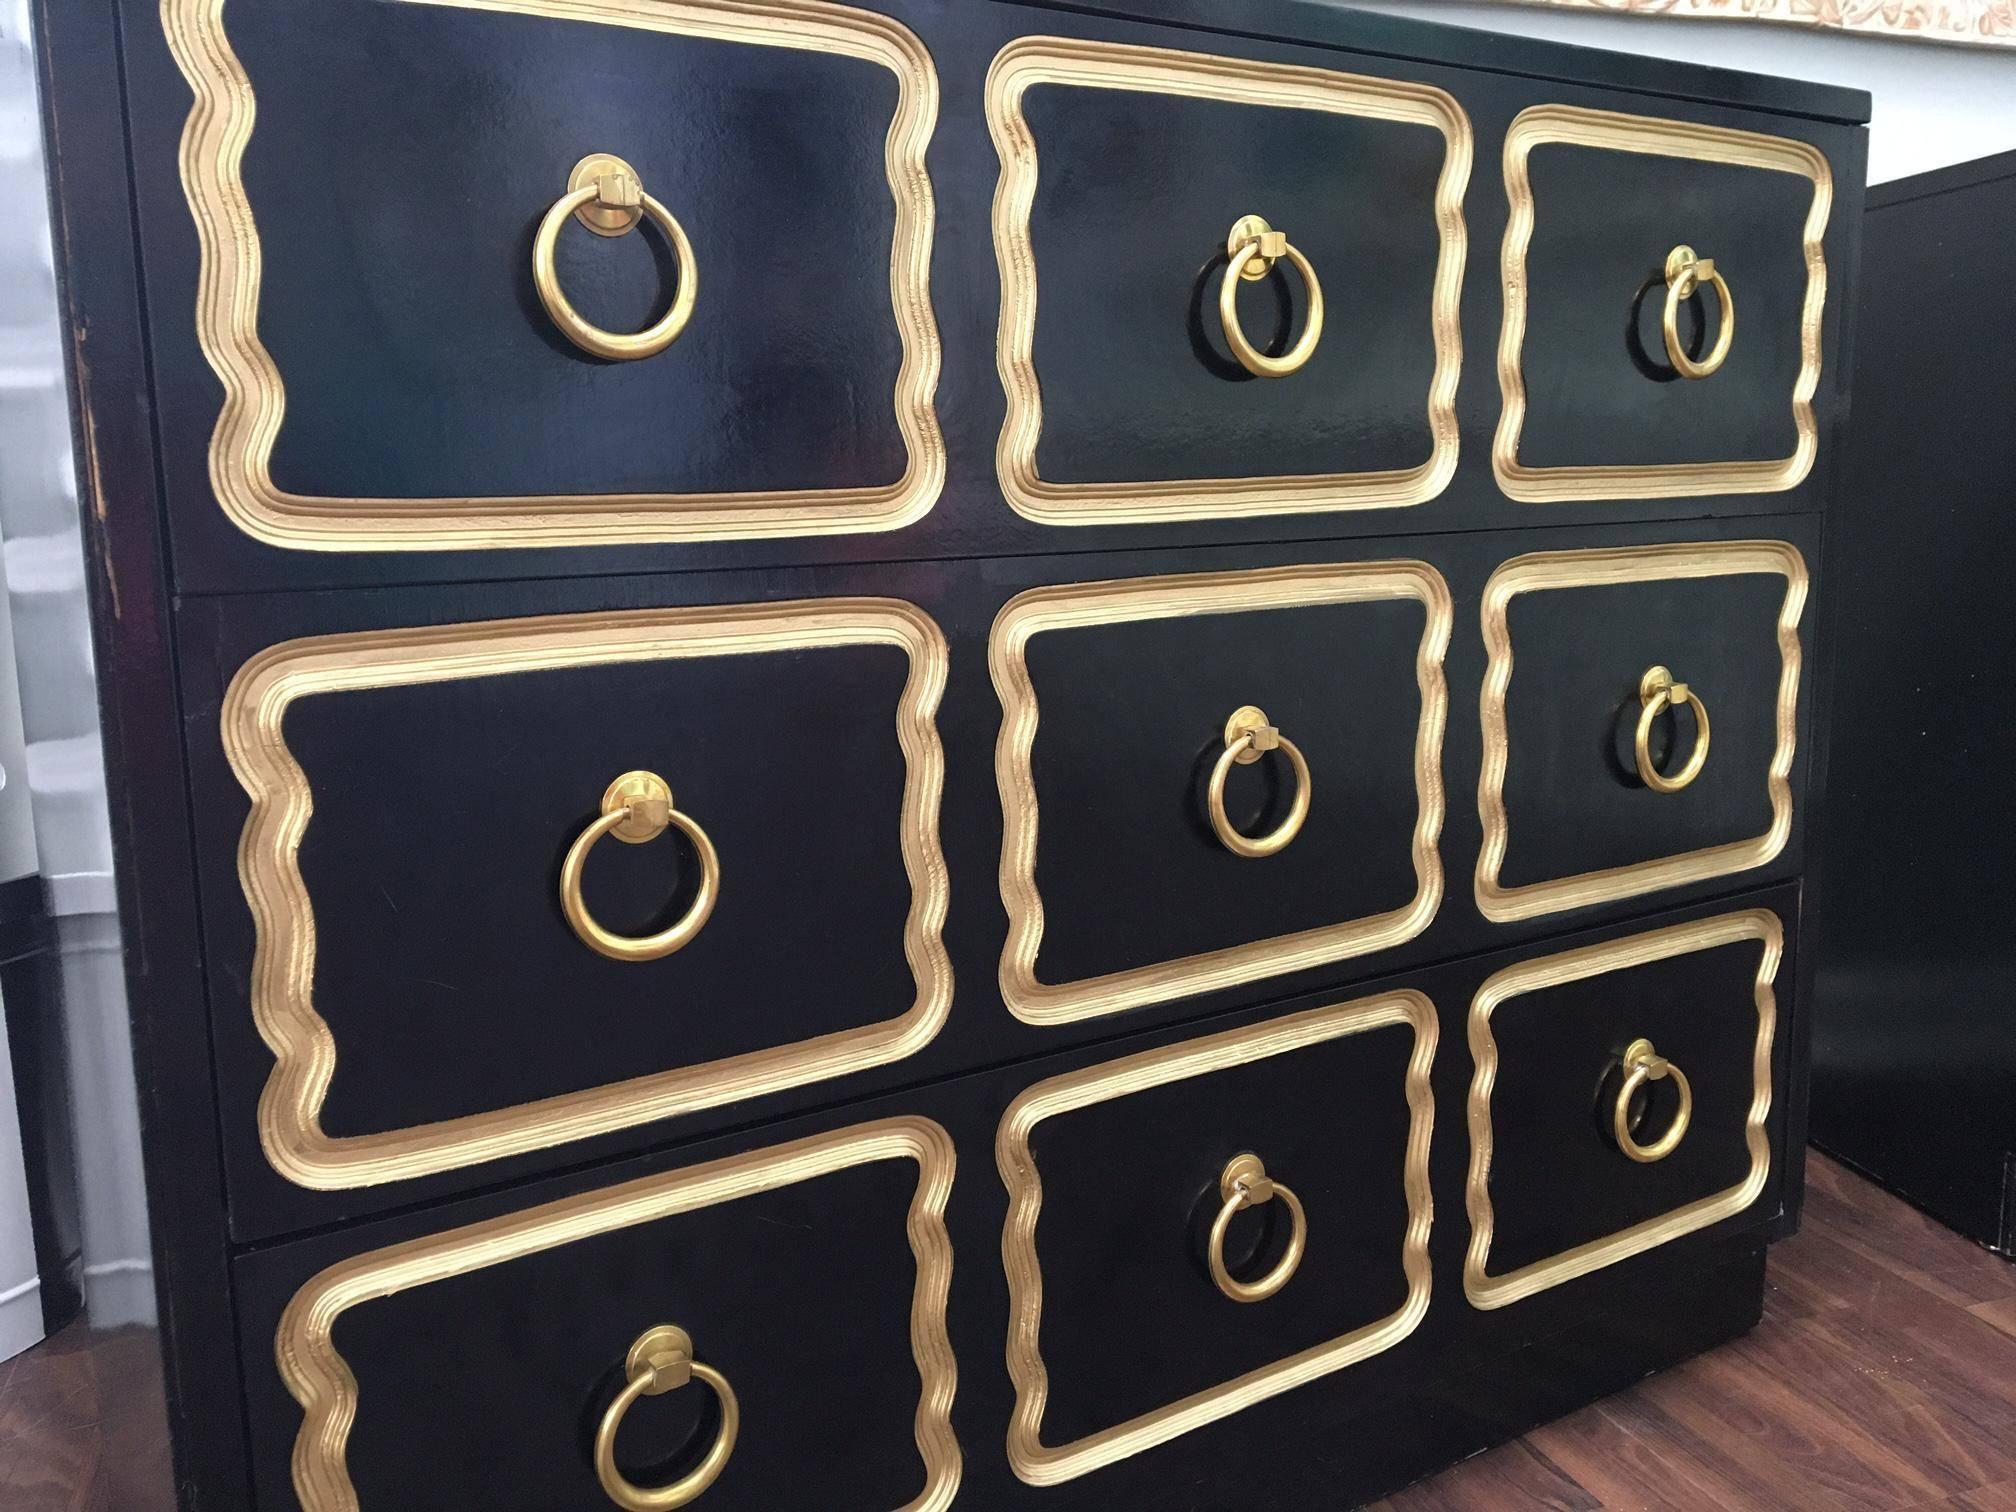 Pair of matching Dorothy Draper style Espana dressers in the iconic black with gold trim. Features brass hardware and dovetail jointed drawers. Good vintage condition consistent with age. 